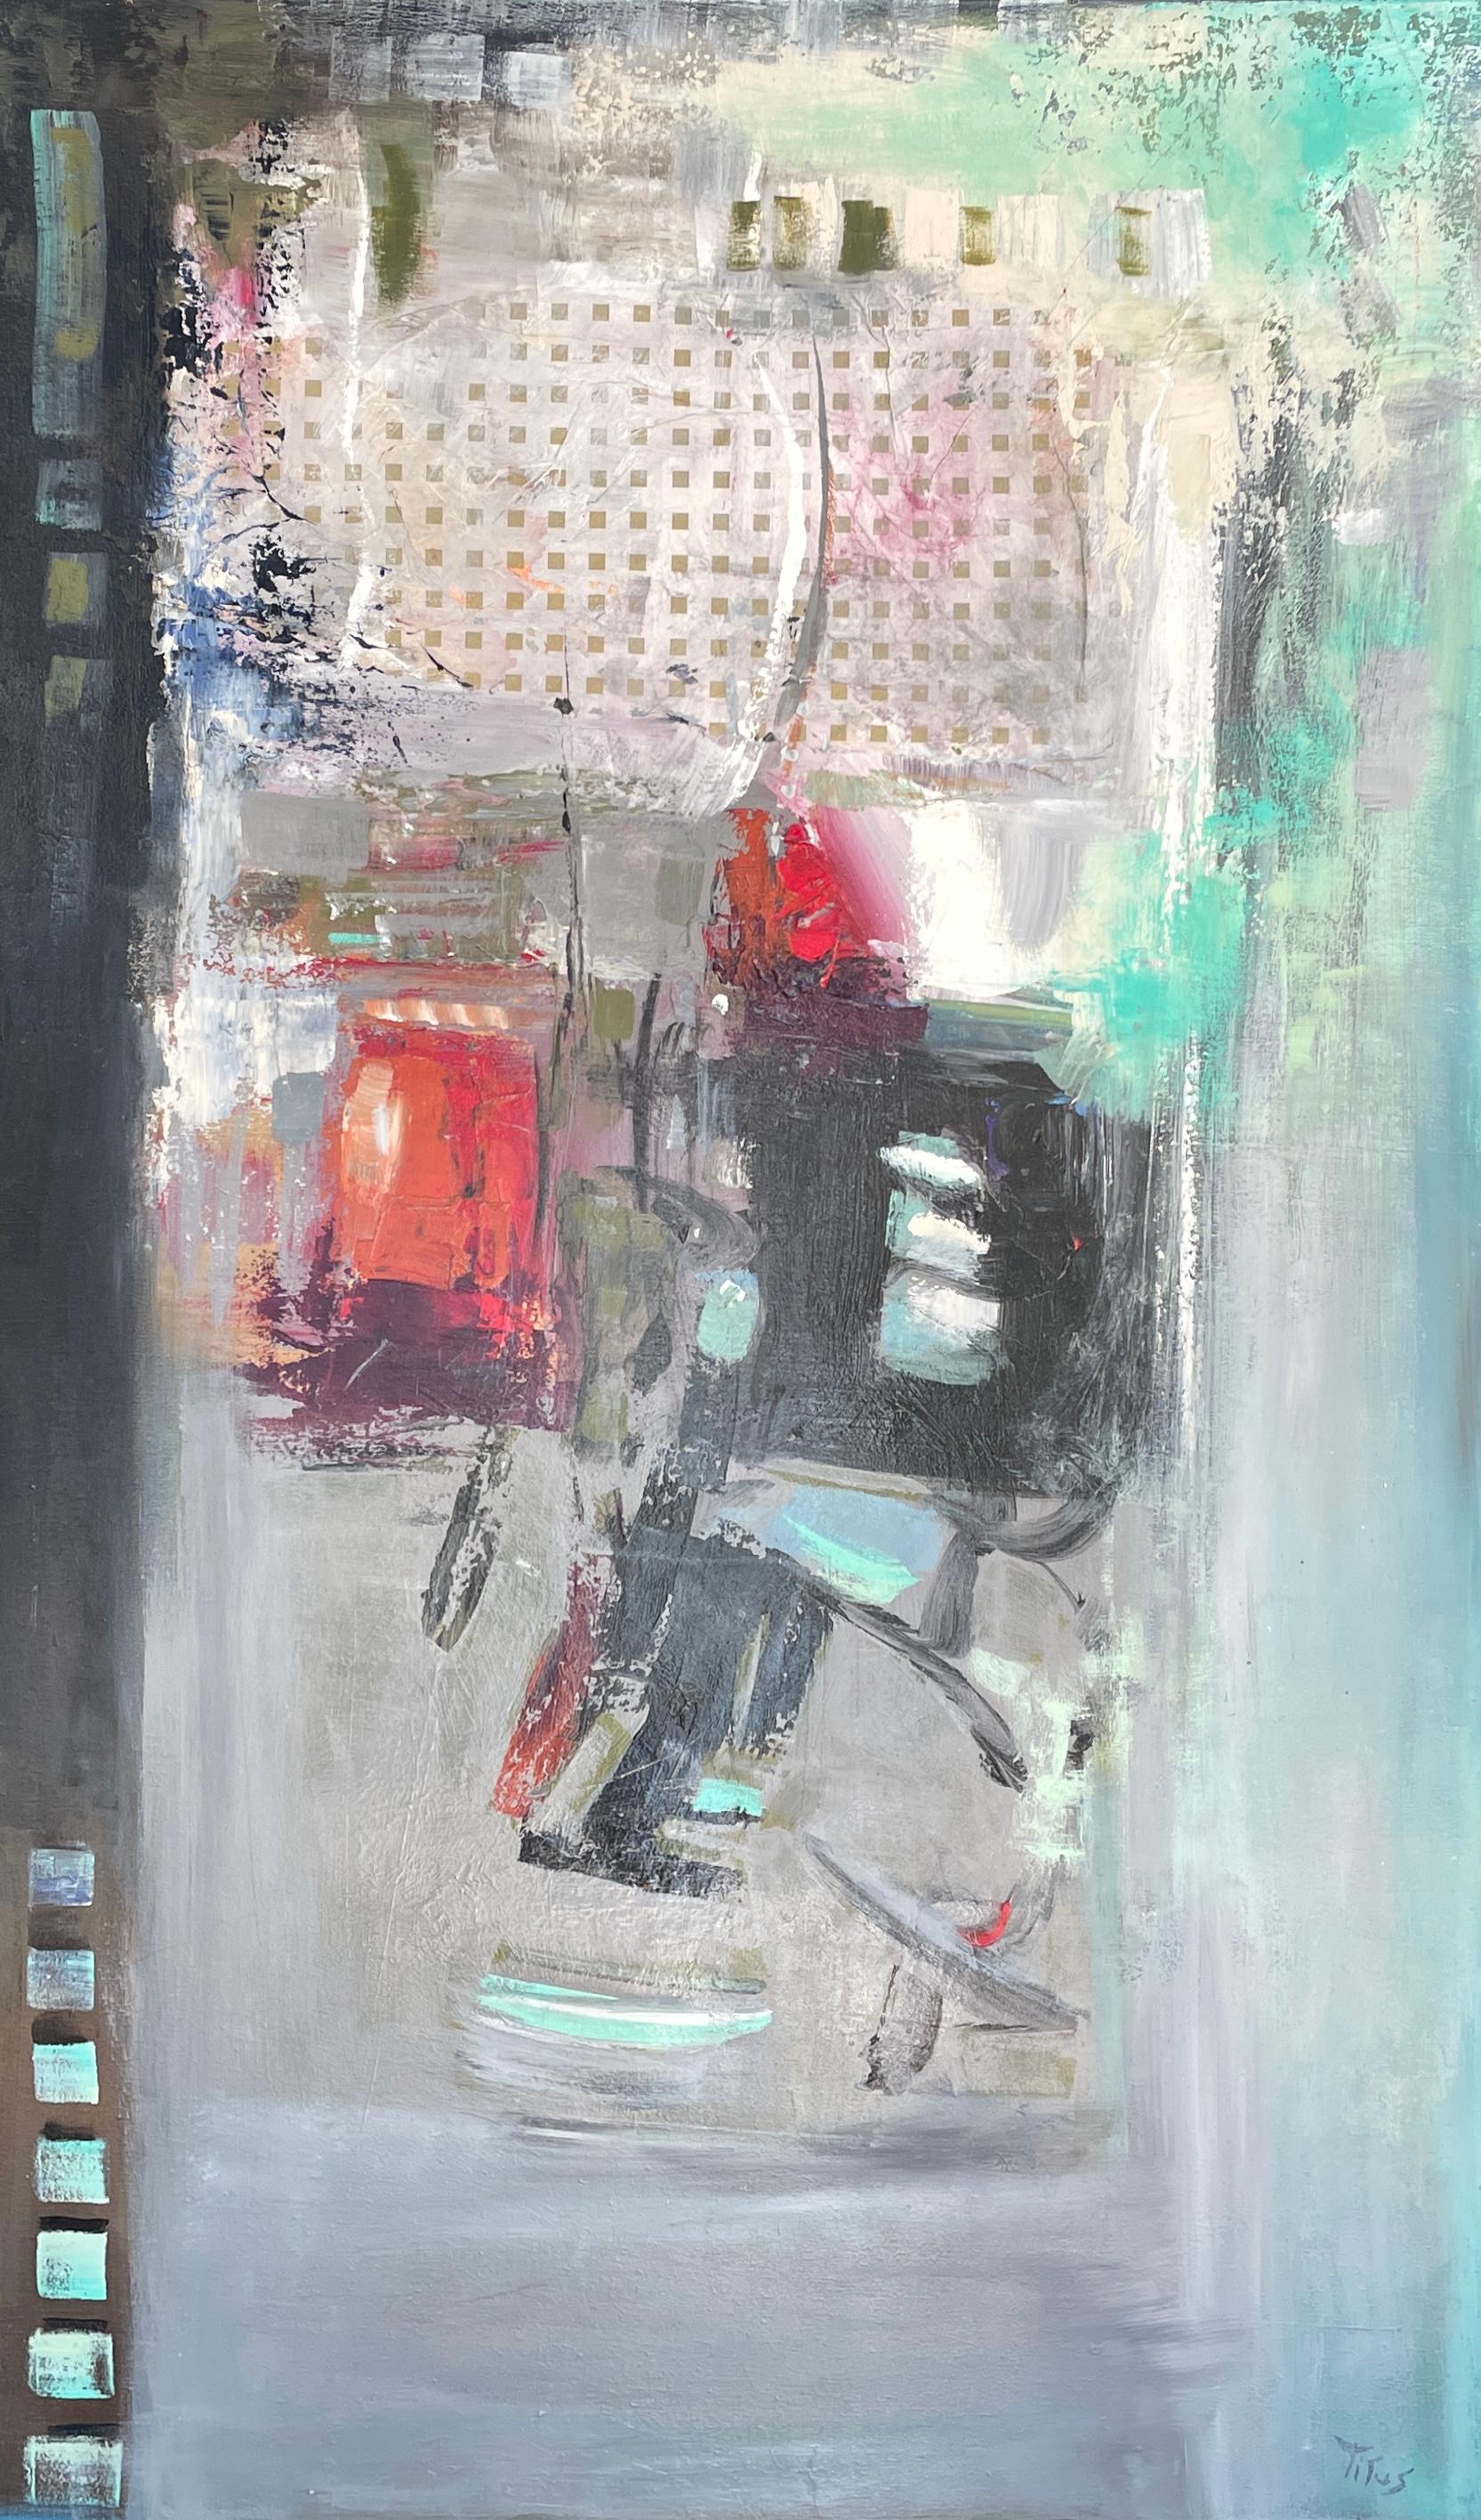 "Paradox" by Mary Titus is an intriguing 60" x 36" acrylic and mixed media canvas that embodies the spontaneous and emotive spirit of abstract expressionism. Through a palette of calming blues and greys juxtaposed with bursts of red, the artwork